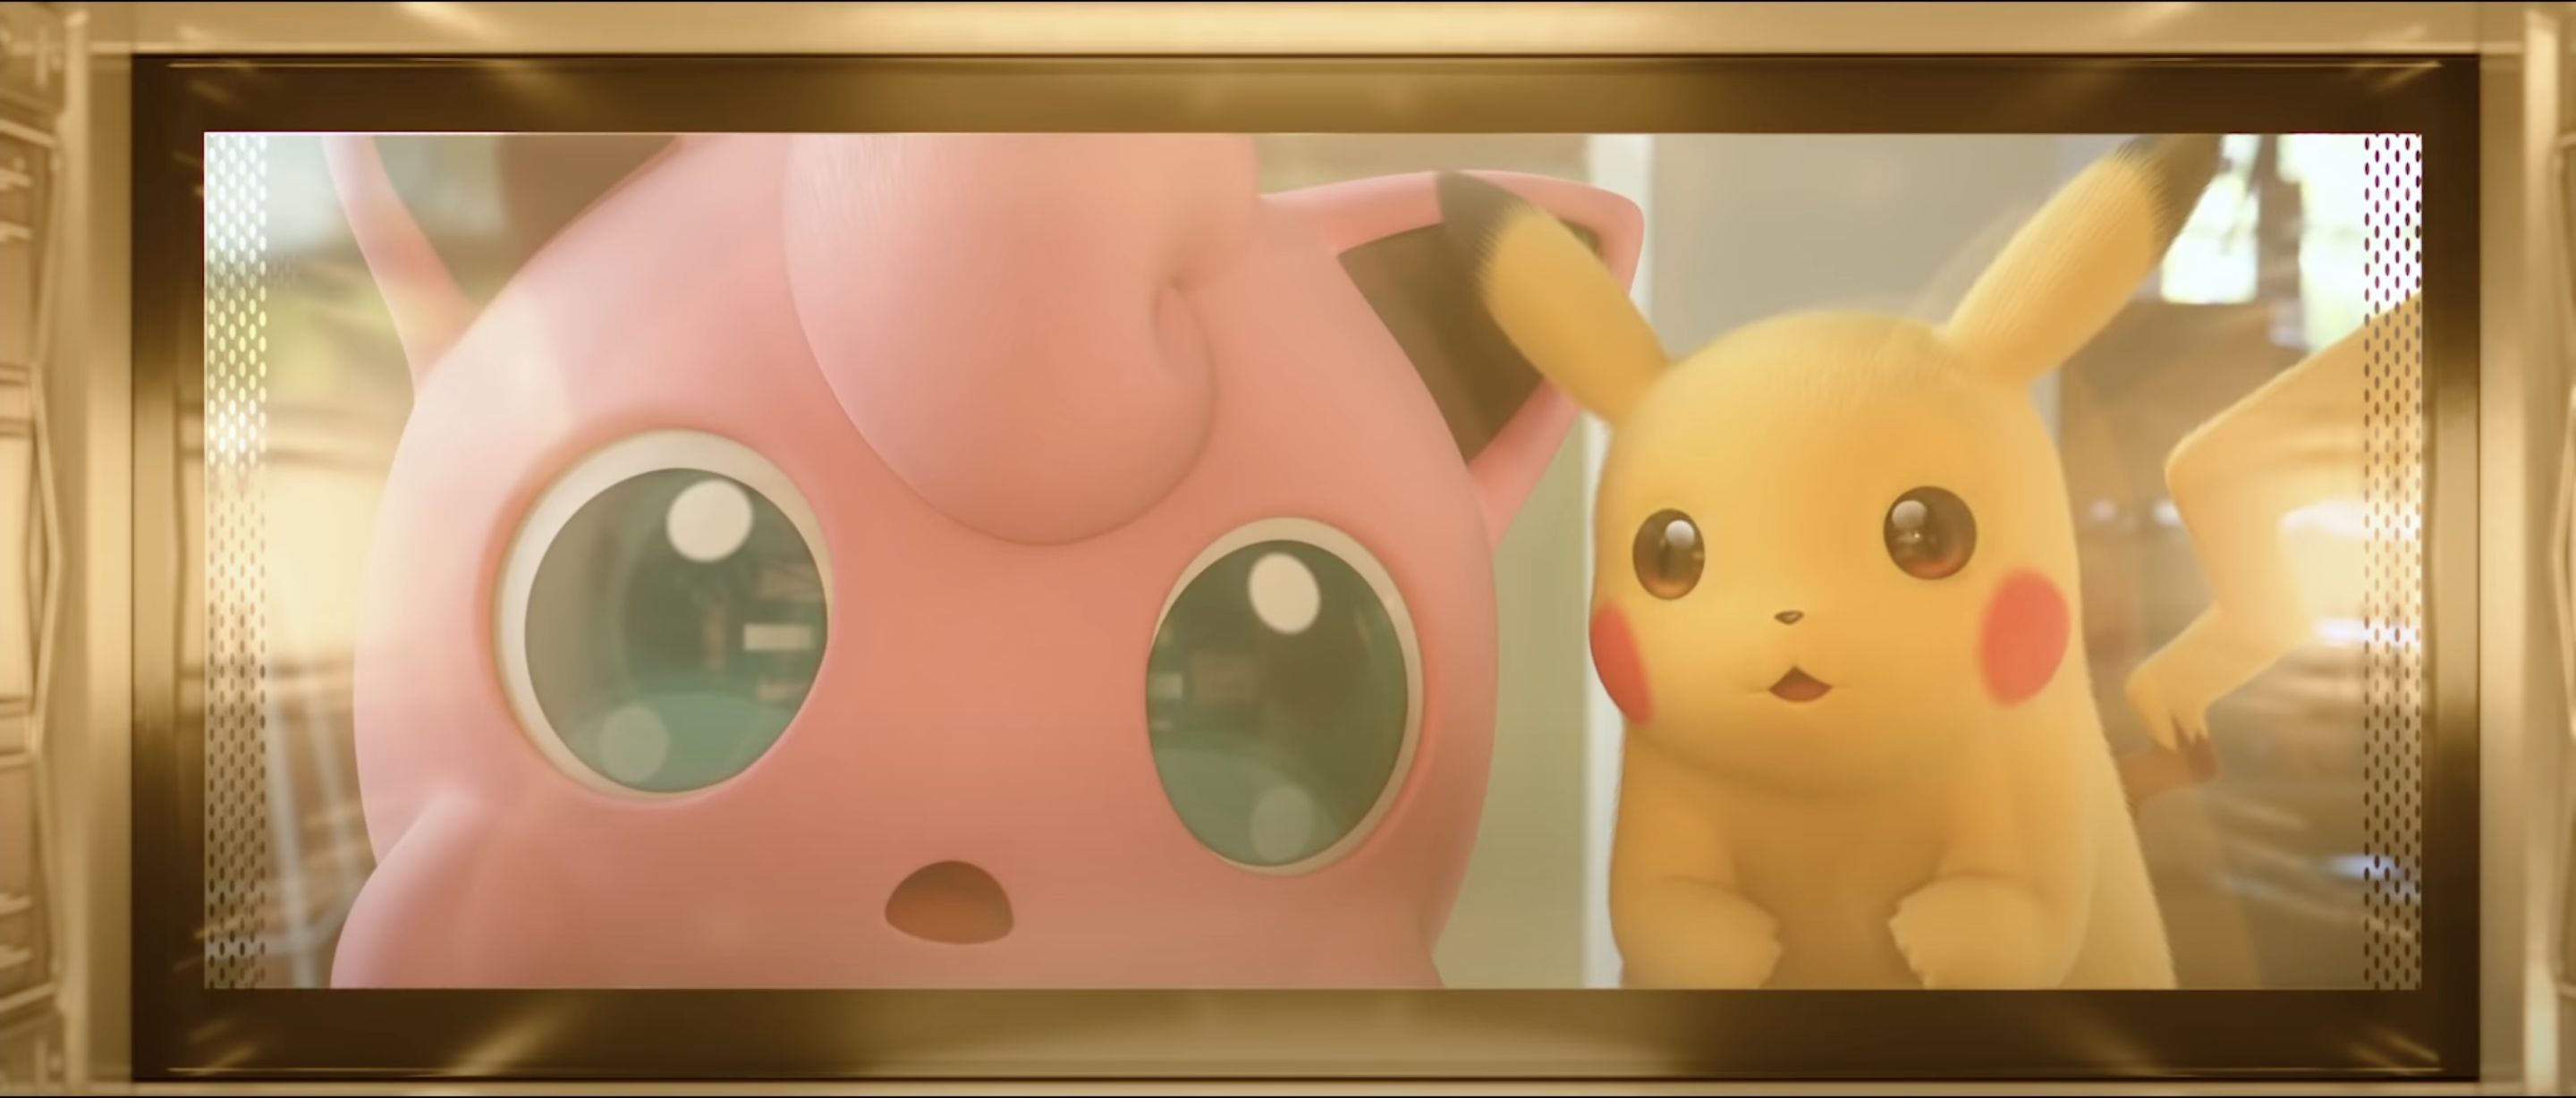 Pokémon Company Releases Cooking Video Featuring Pikachu and Jigglypuff -  Gameranx